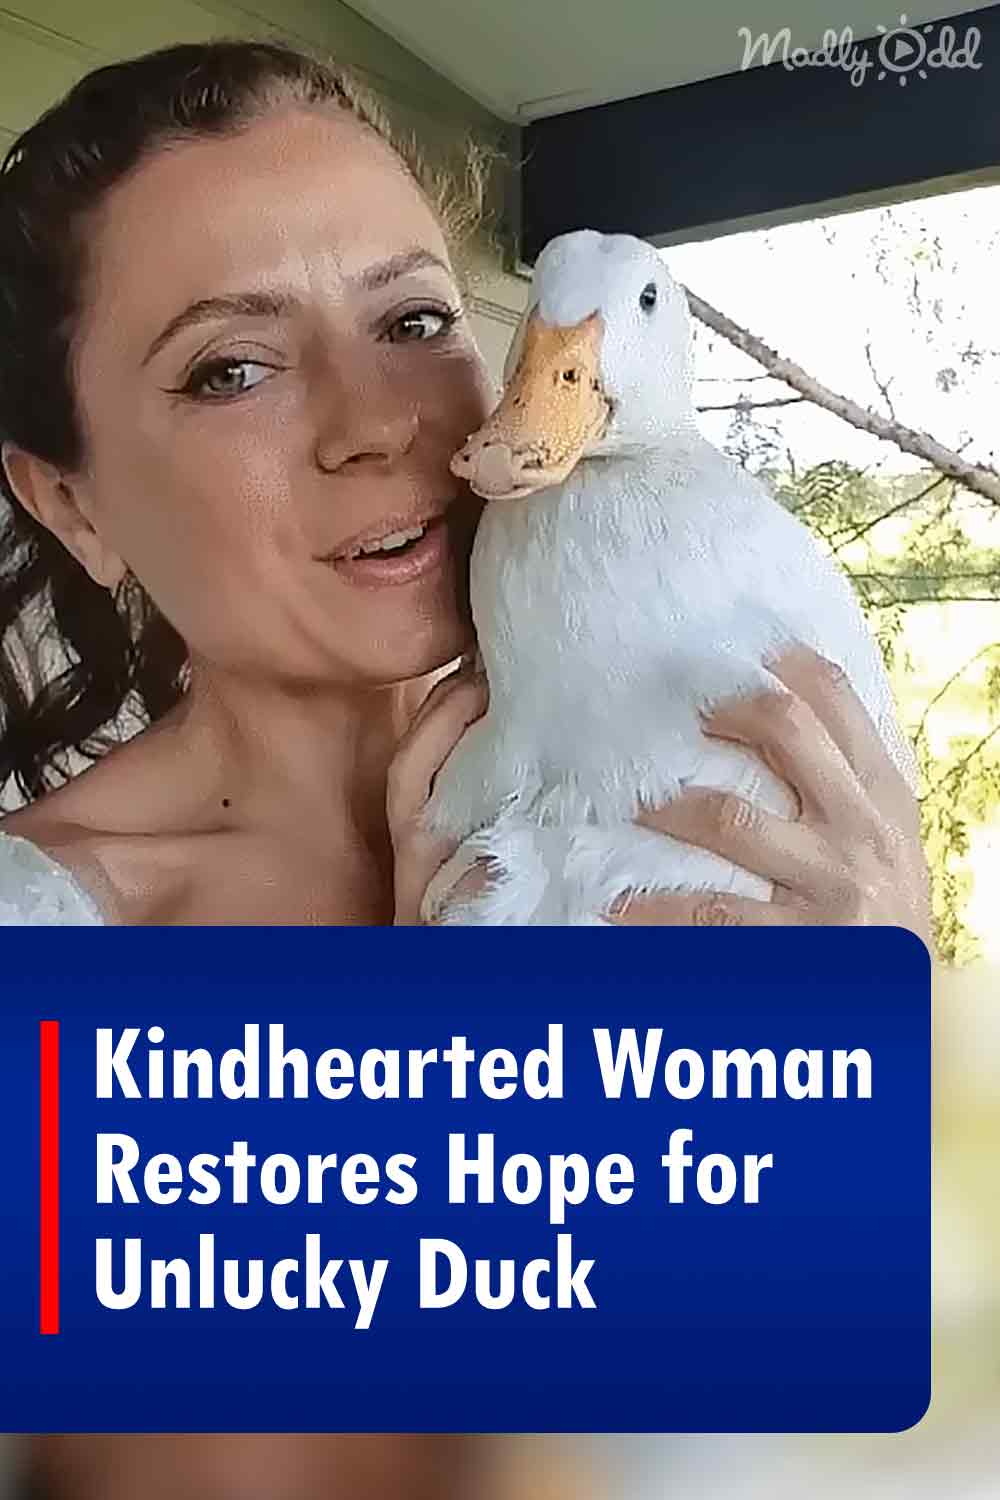 Kindhearted Woman Restores Hope for Unlucky Duck